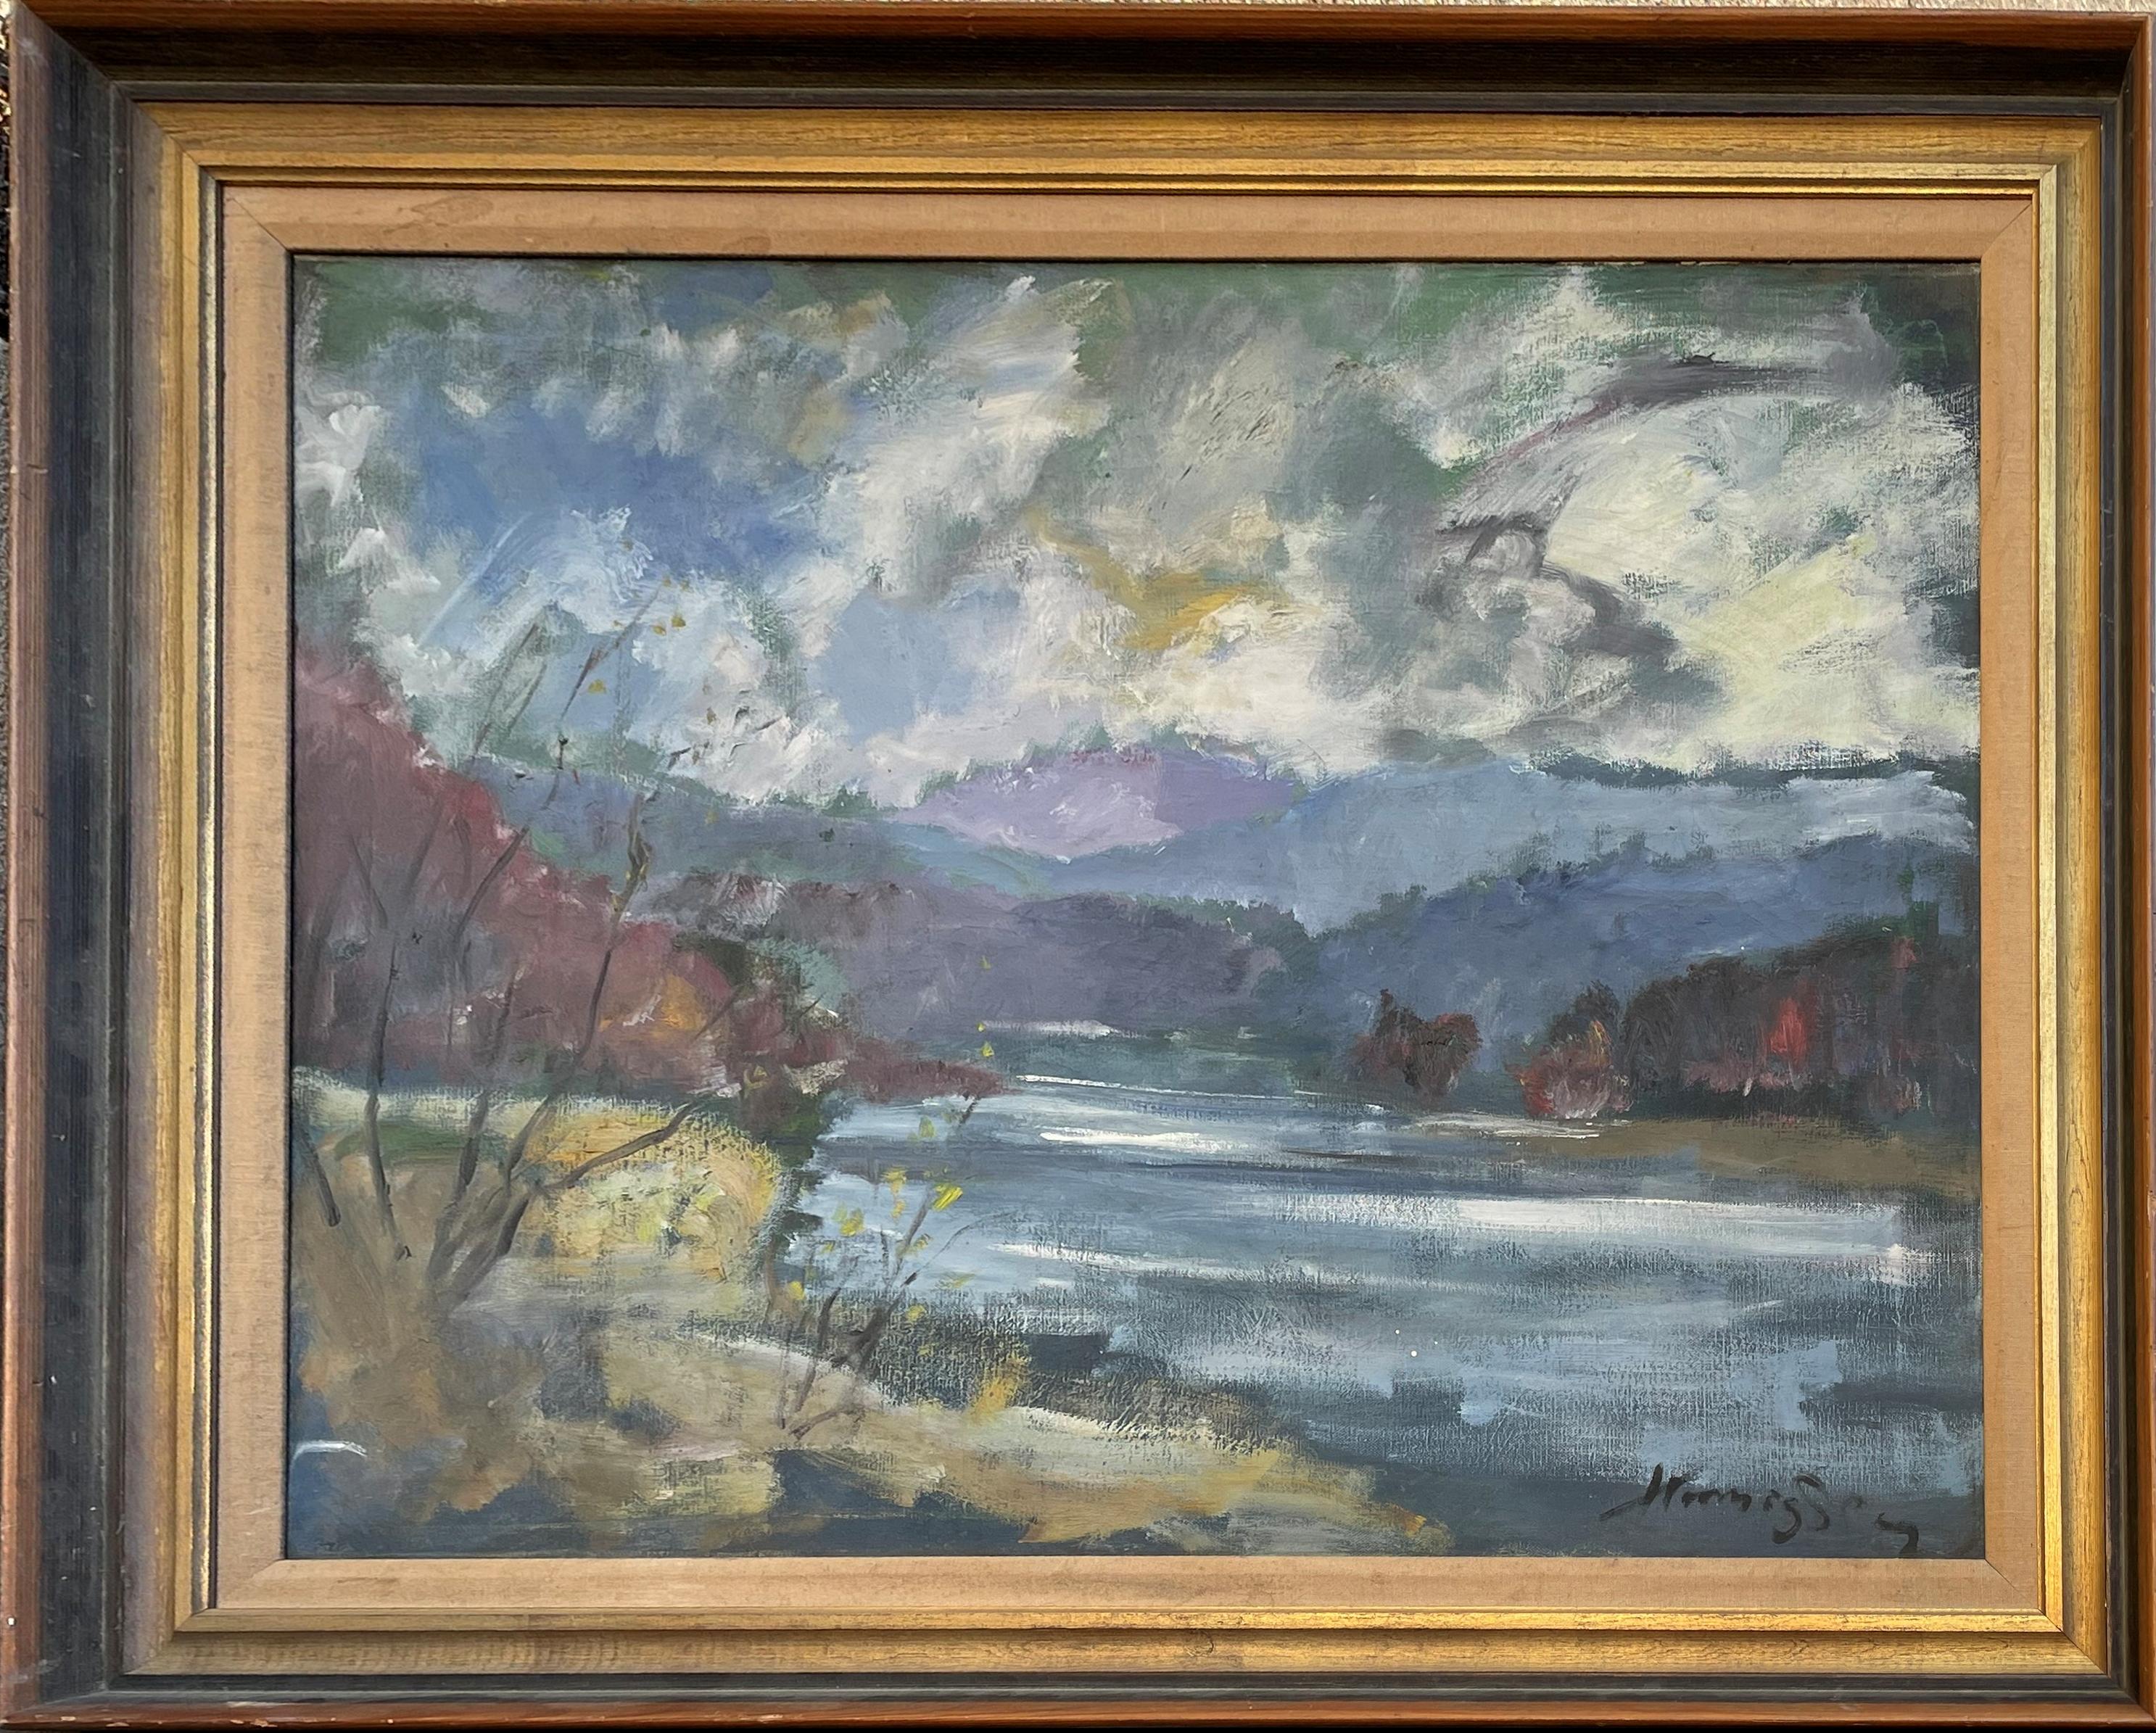 Mohansic Lake, Westchester, New York
Oil on canvas
24 x 30 inches
Signed lower right

Born in St. Fiden (St. Gallen), Switzerland, John Hansegger was educated in Europe. He had his first one-man show in Zug, Switzerland in 1928 where the local press